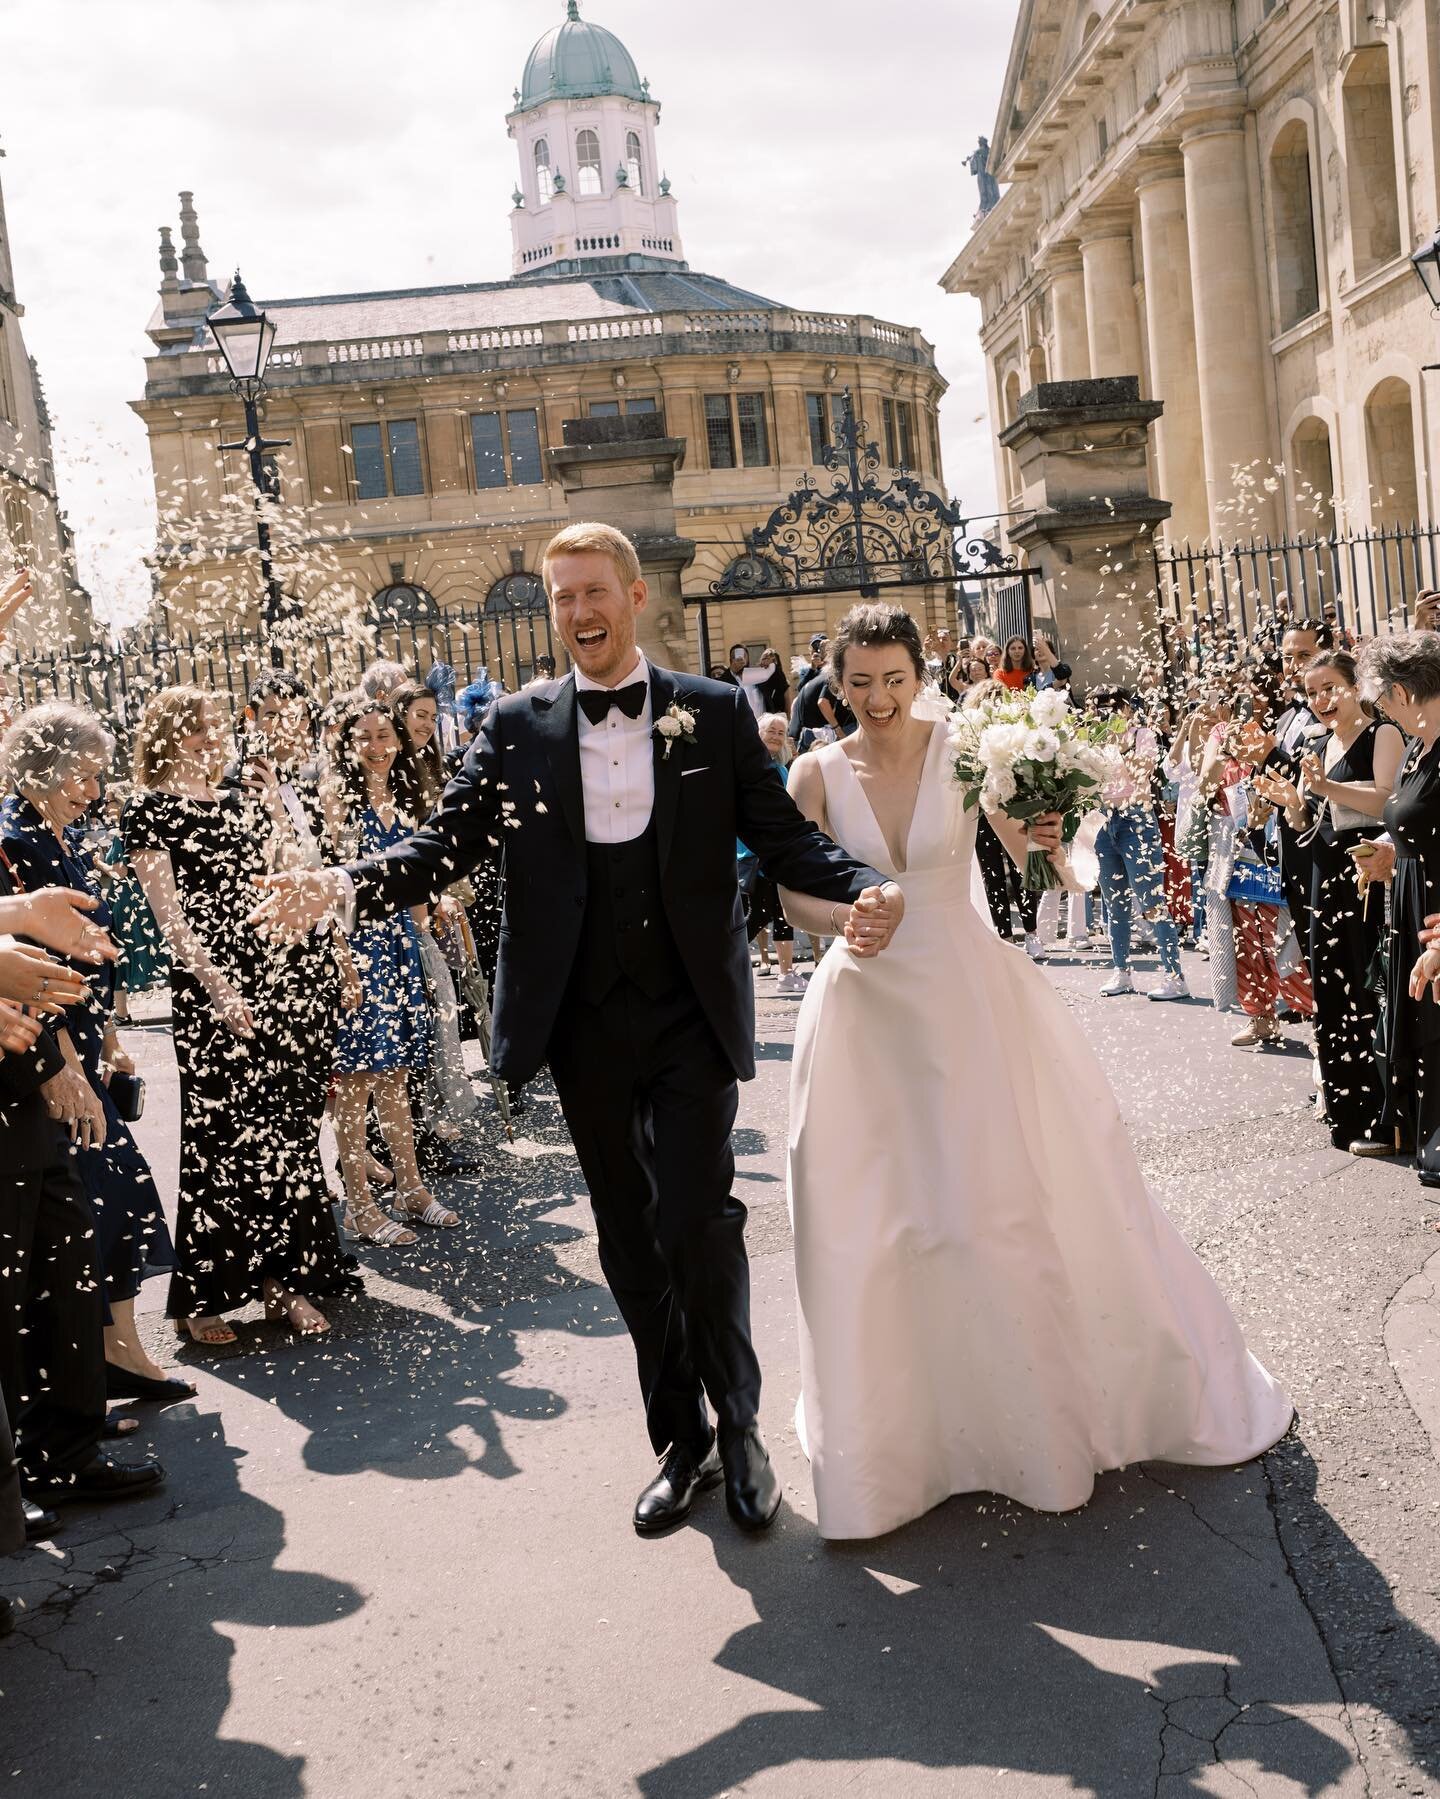 Anna and Graeme, just married, being showered in confetti beneath the Bridge of Sighs in Oxford. It was a great moment - the sun shone, our bagpiper piped and passersby applauded!

Photography: @taylorandporter
Planning and design: @emmajoythewedding